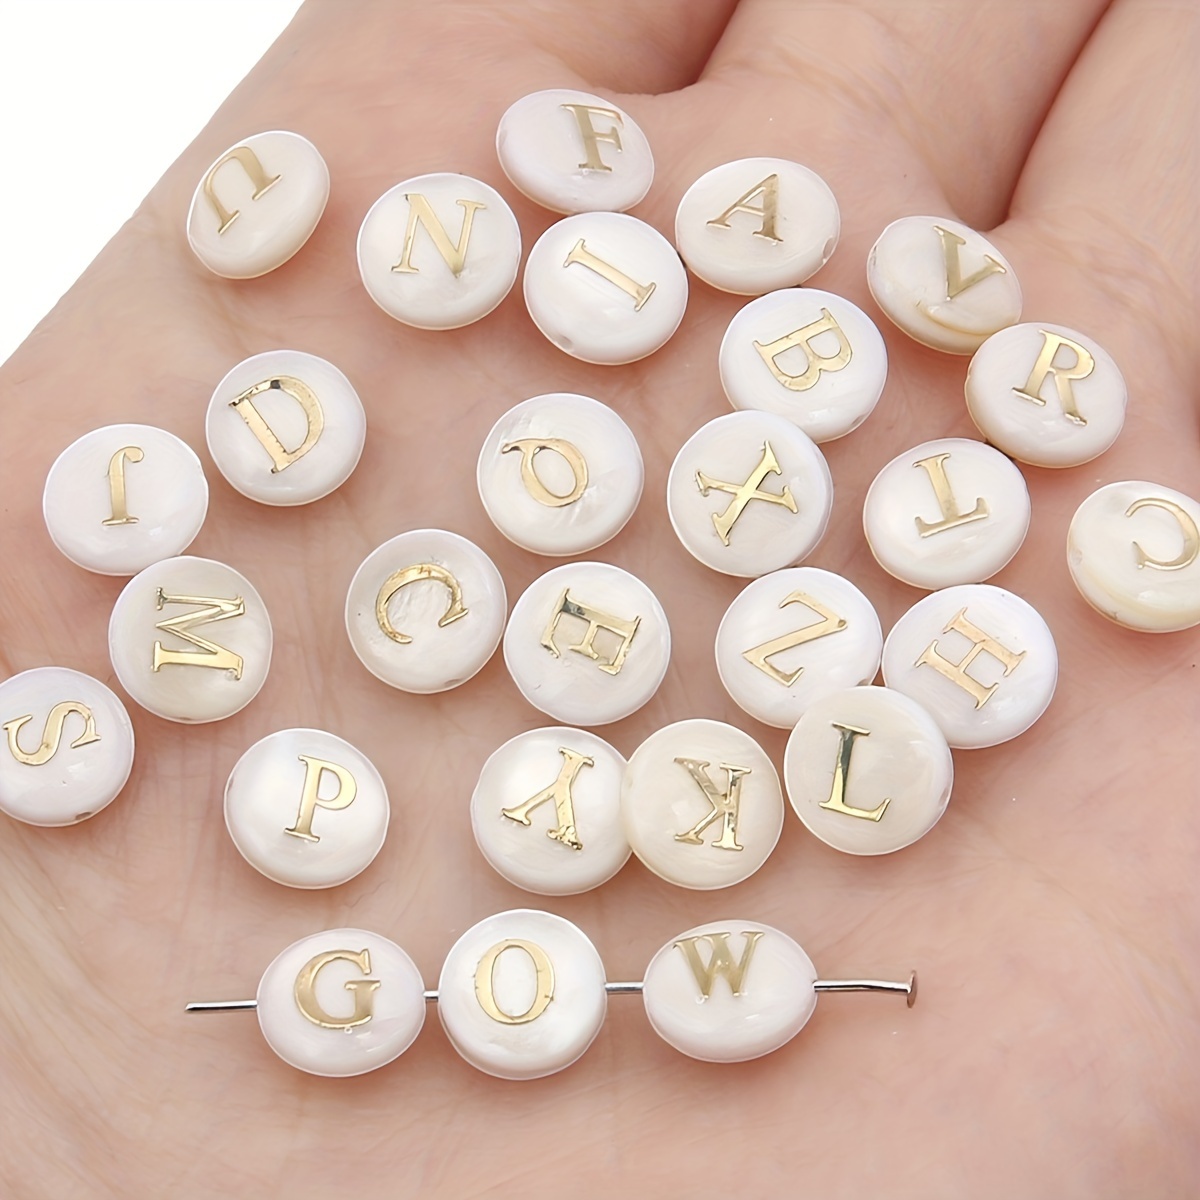 

artisanal Accents" 26-piece A-z Natural Shell Alphabet Beads Set, 8mm Enamel Letters With Straight Holes For Diy Jewelry Making - Perfect For Bracelets & Necklaces